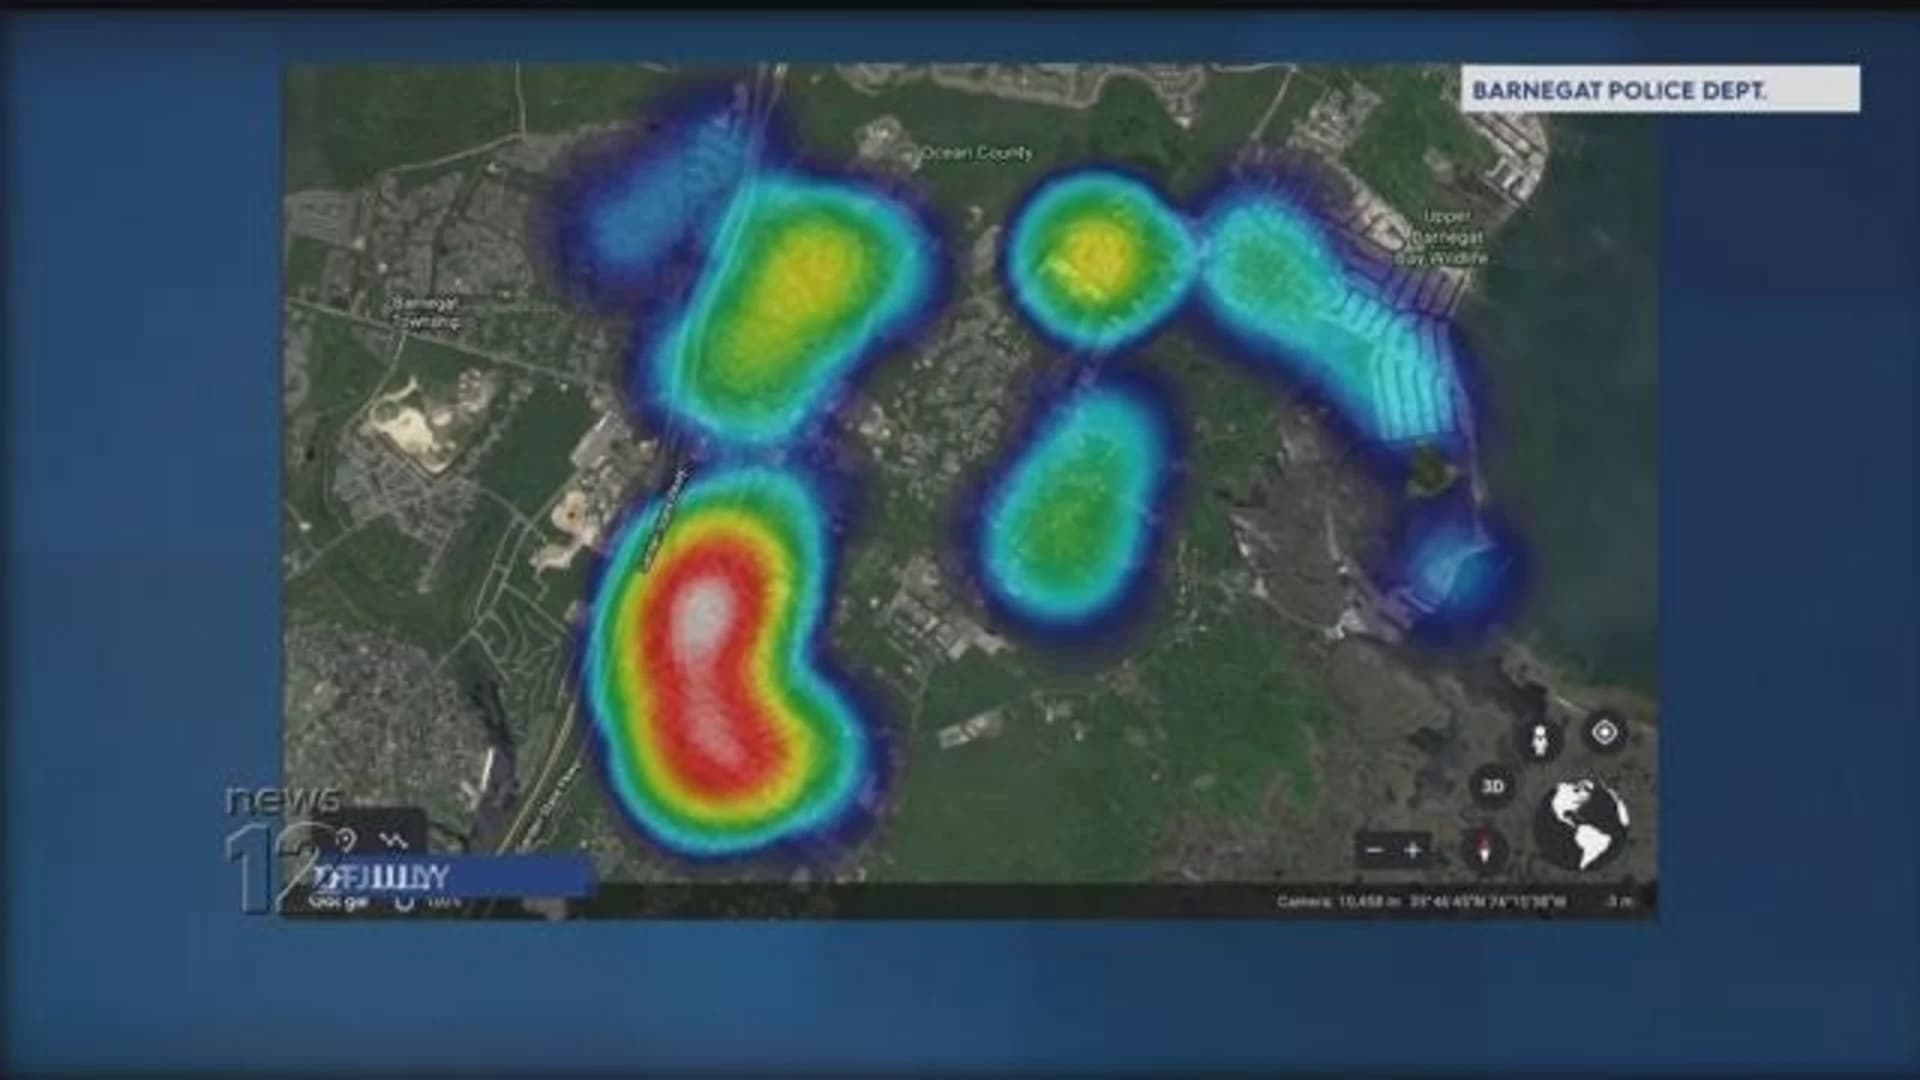 Police share heat map showing fireworks lighting up NJ skies